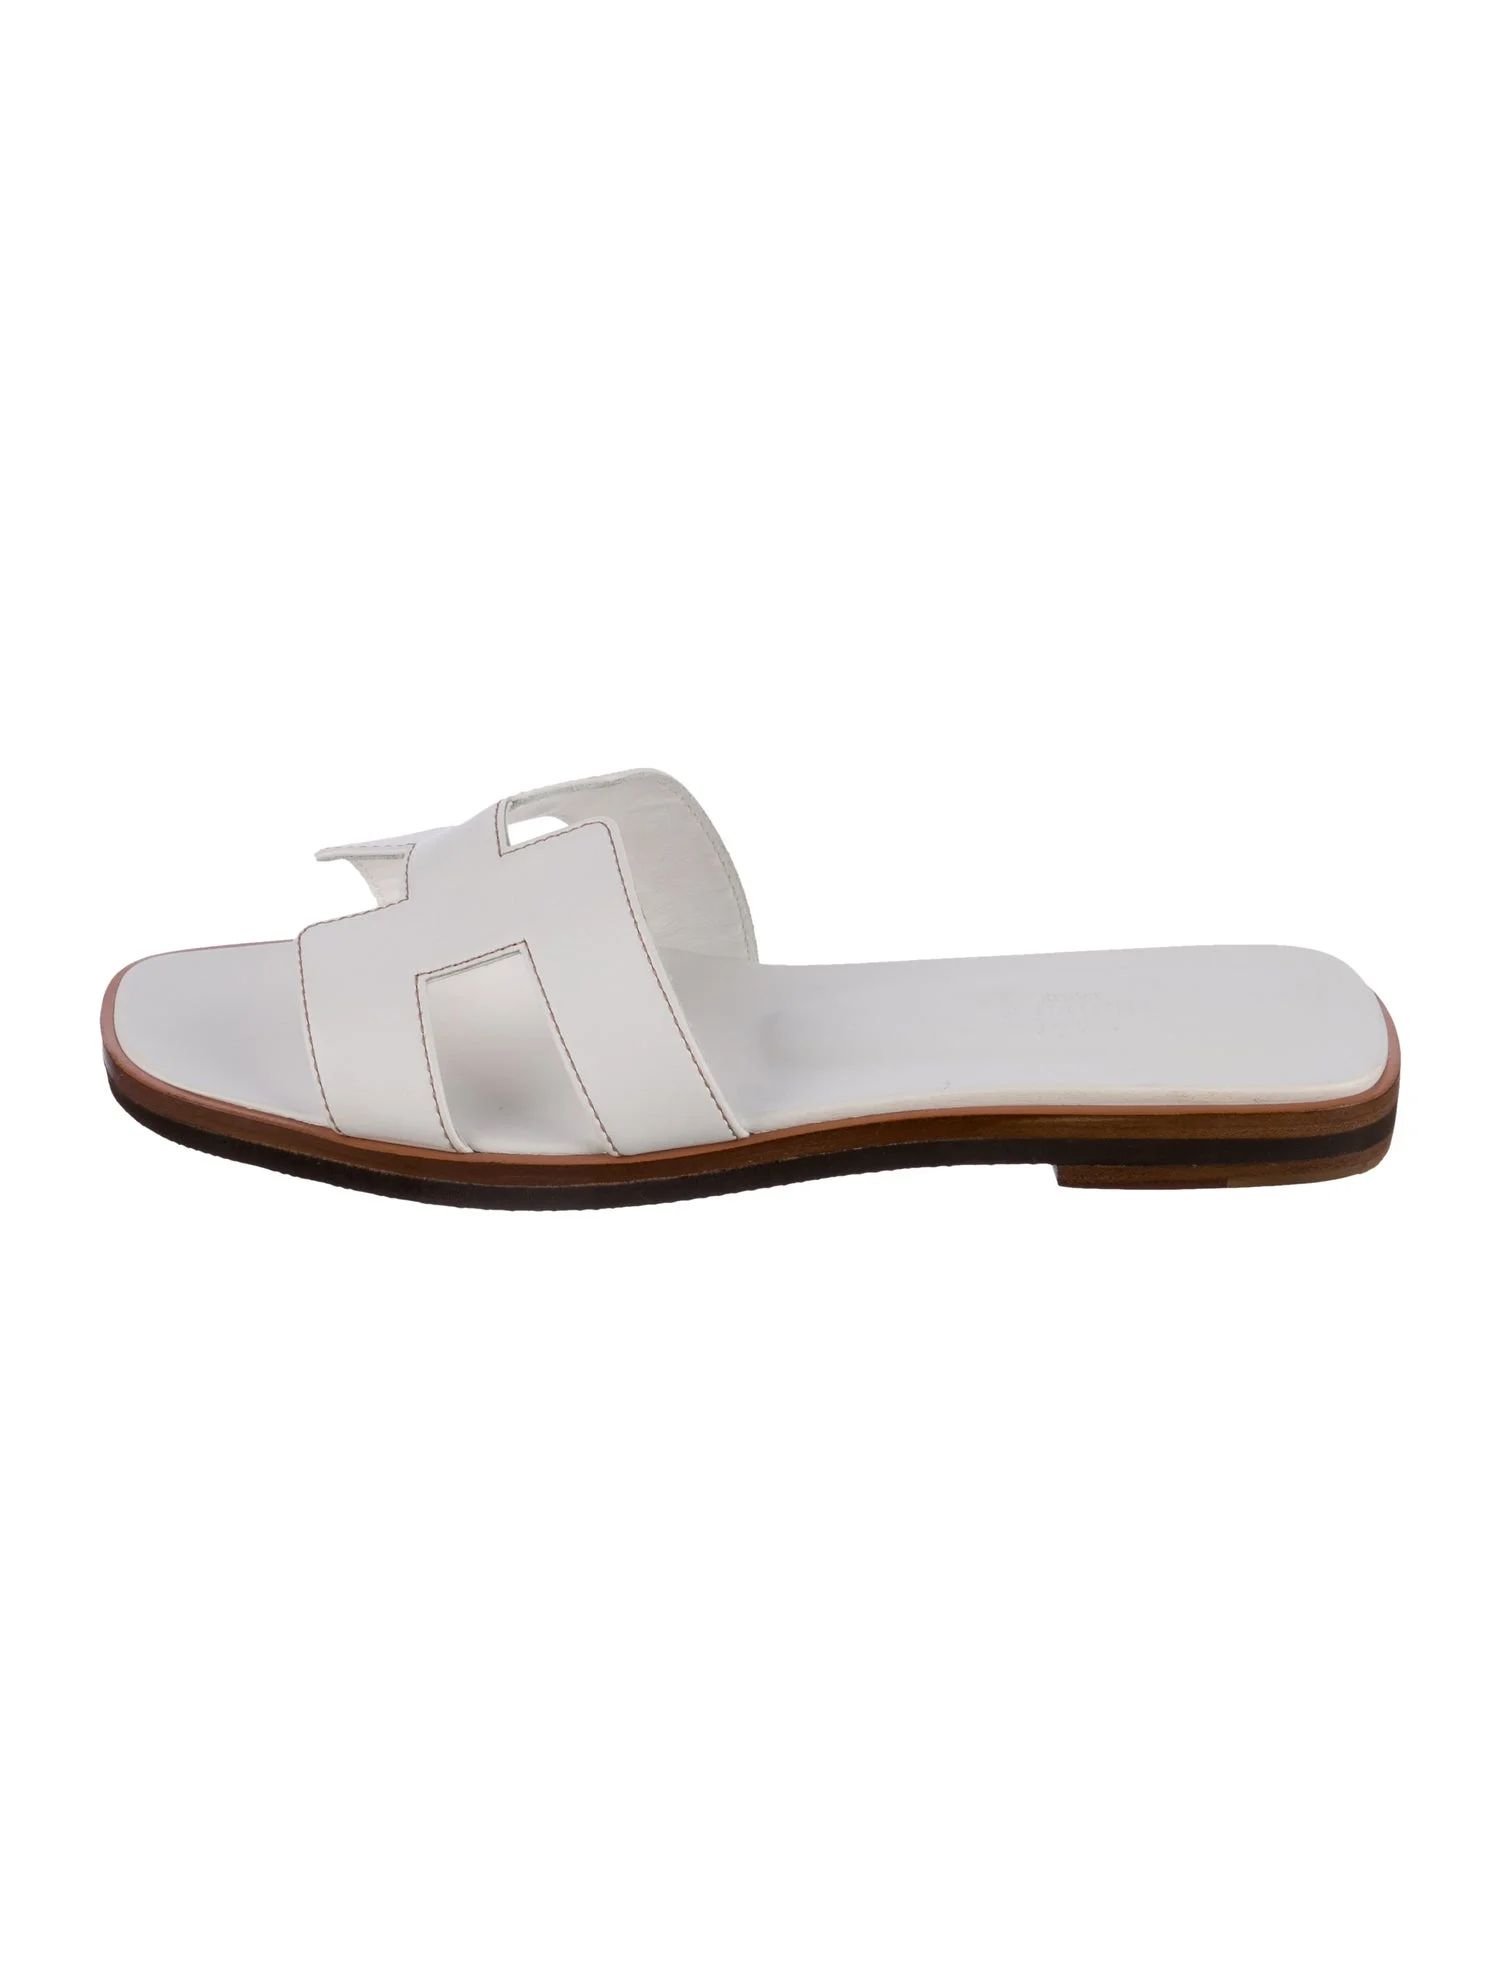 Leather Slides | The RealReal